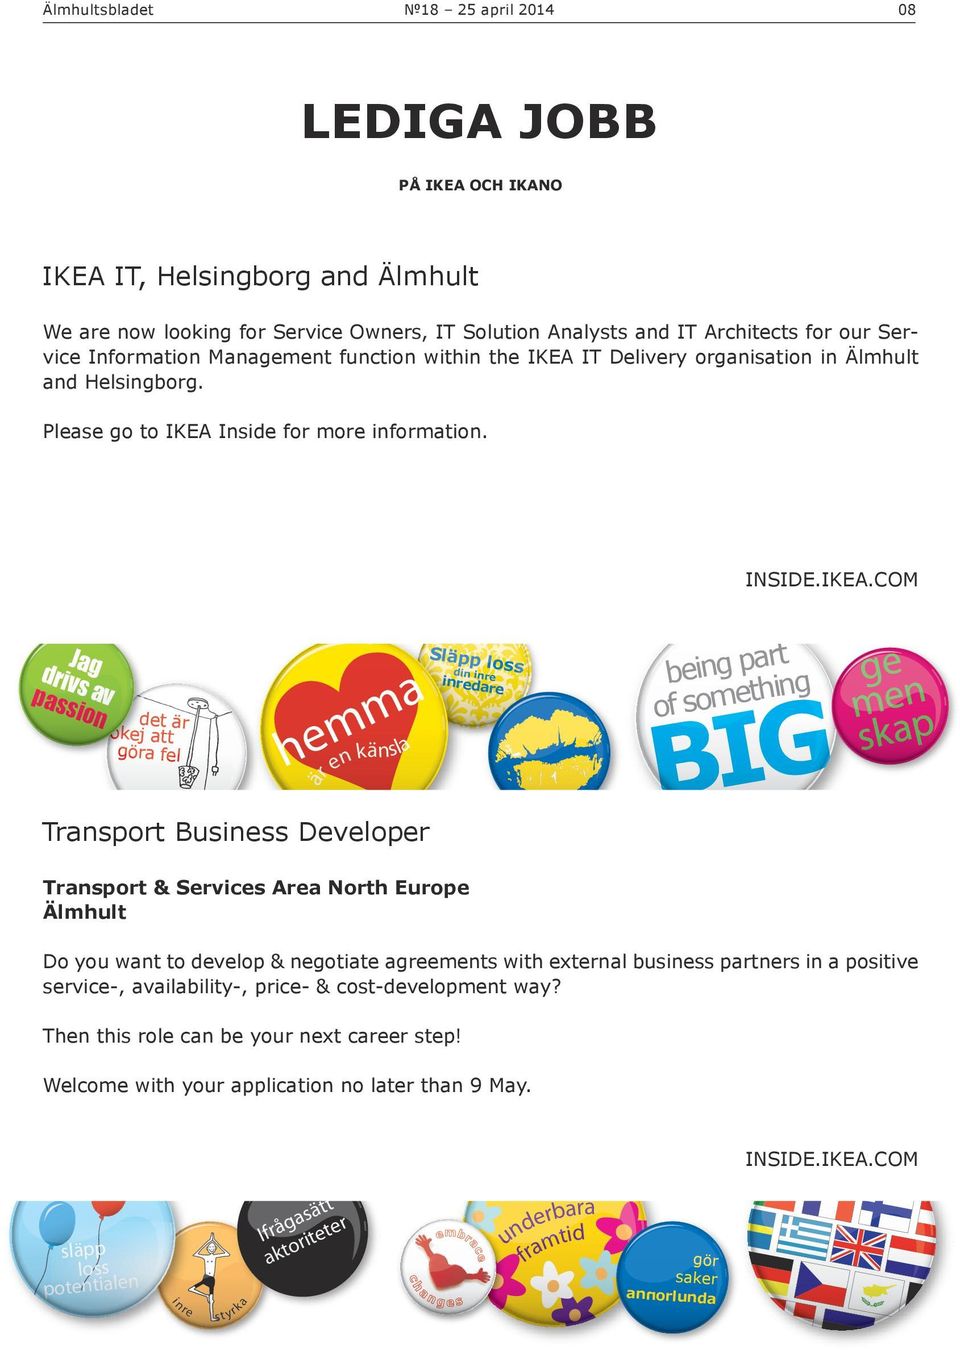 IT Delivery organisation in Älmhult and Helsingborg. Please go to IKEA 